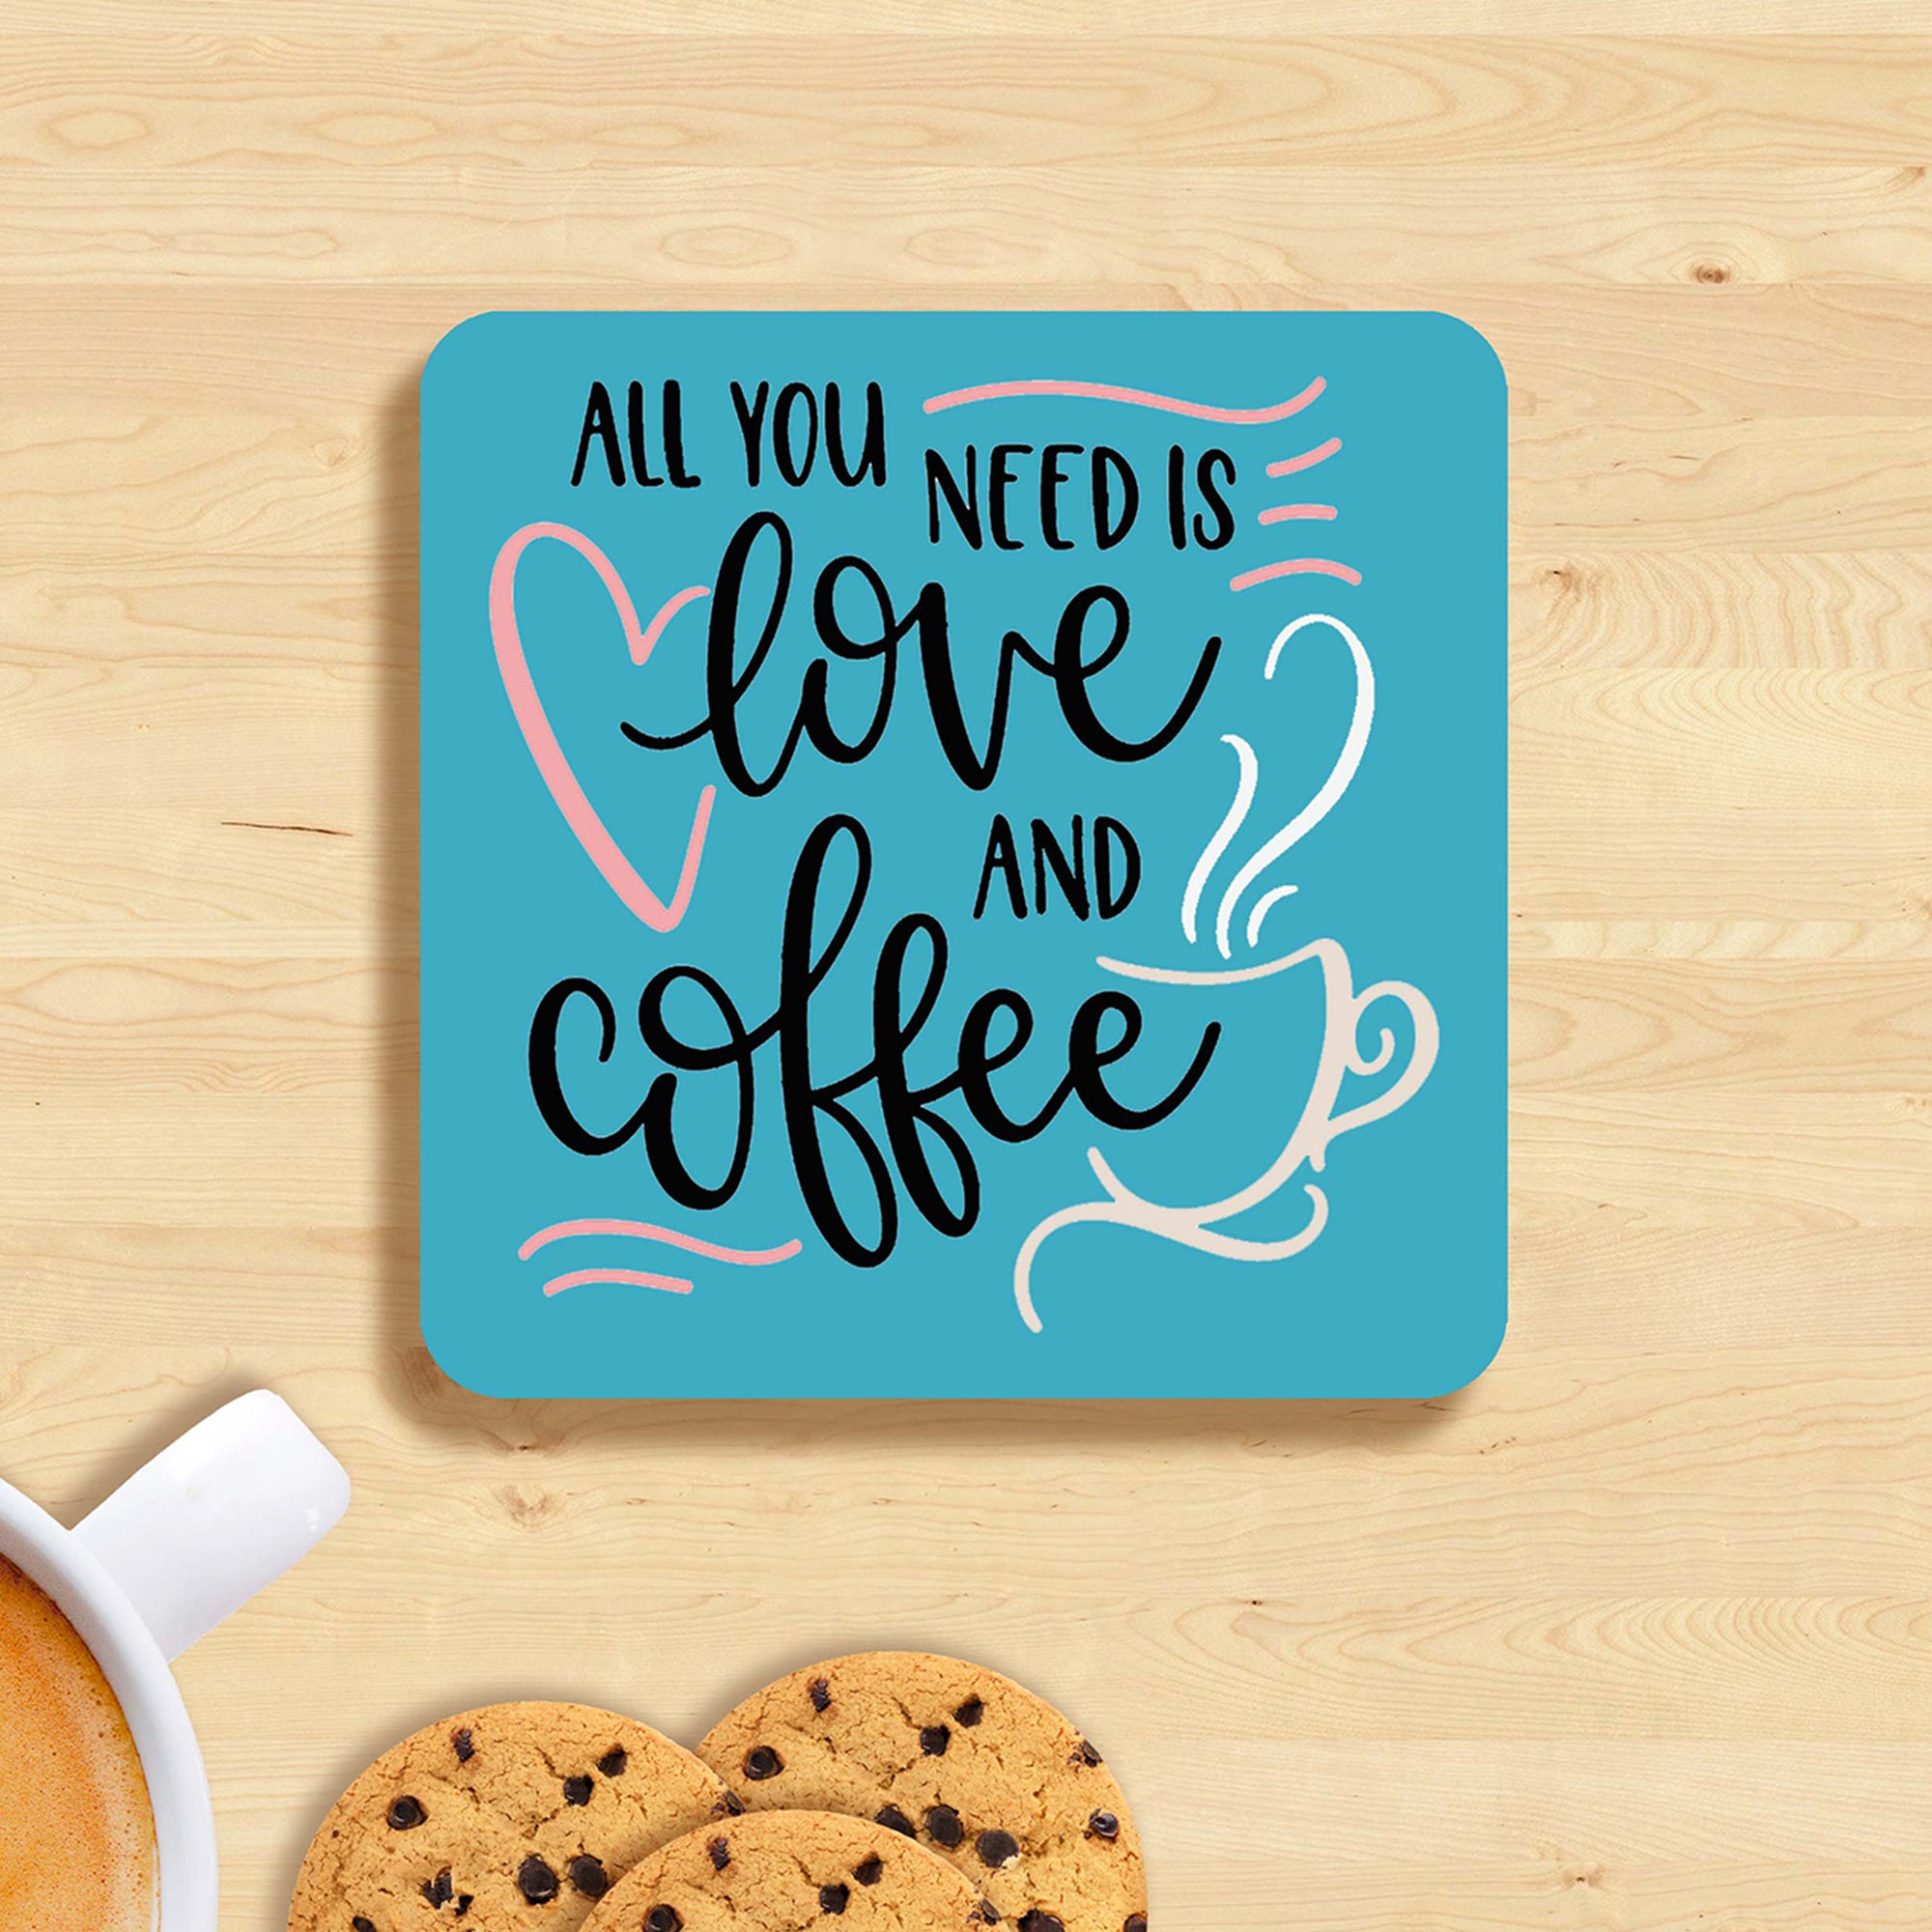 All you need is love and coffee coasters